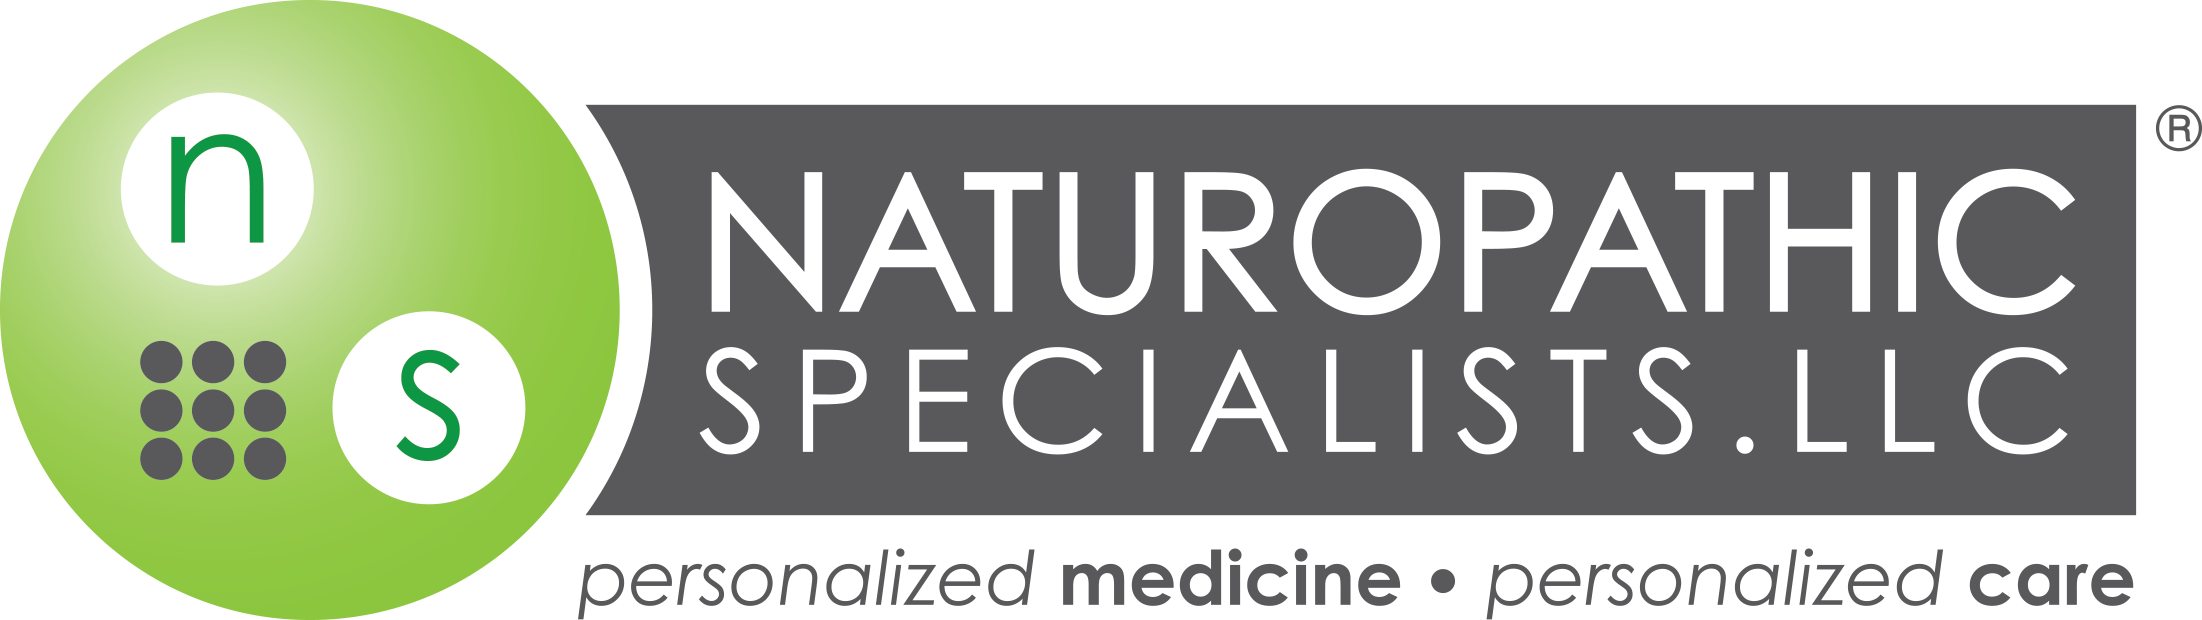 Naturopathic Specialists